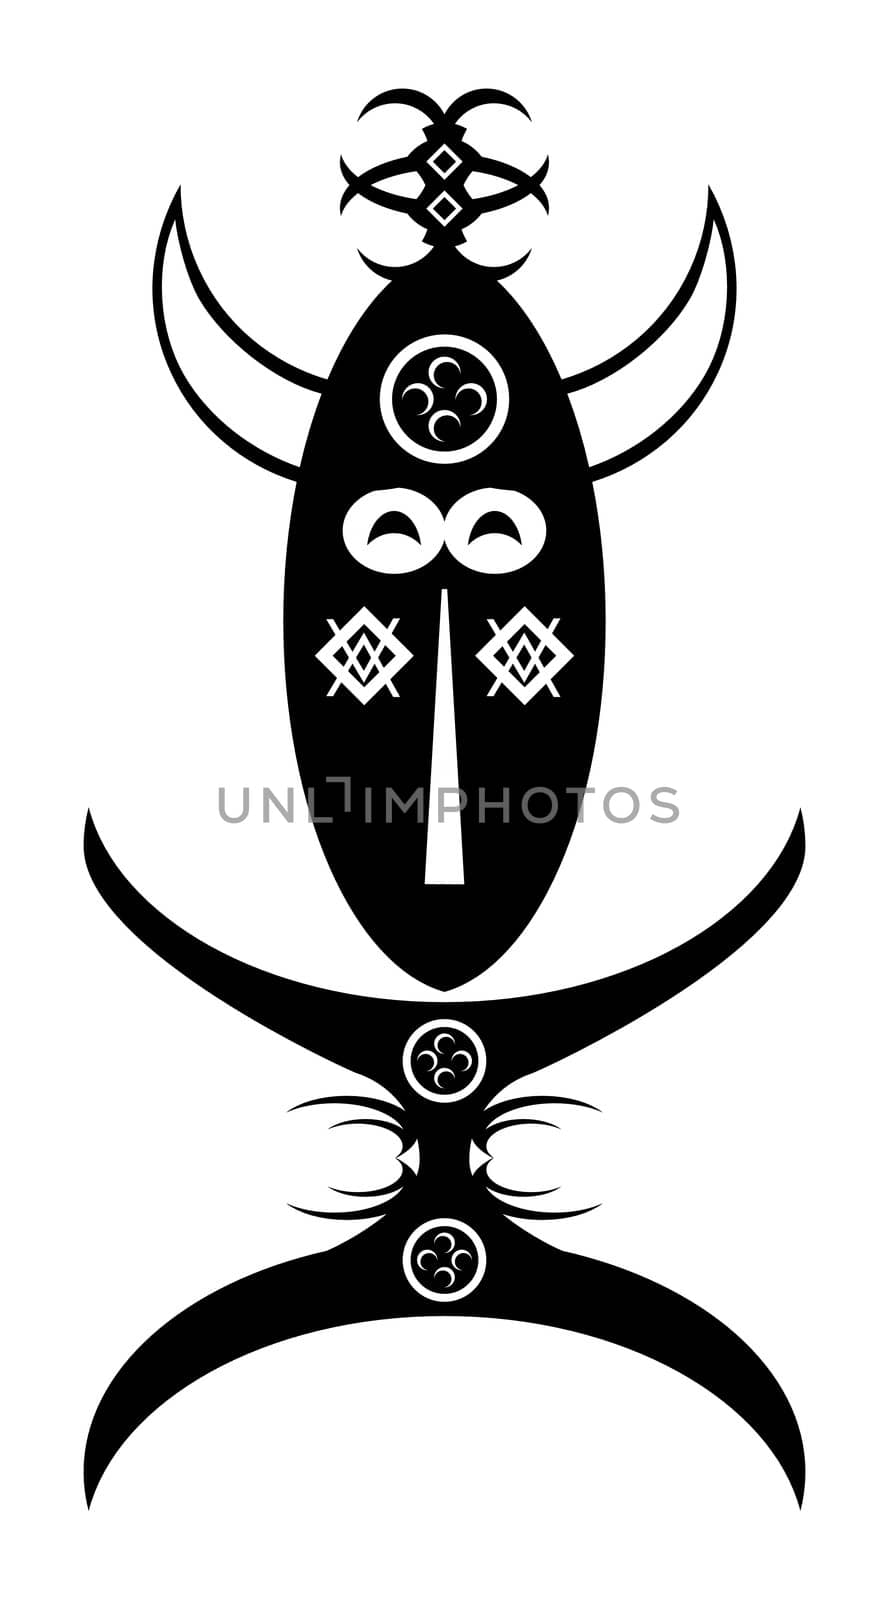 a monochrome stylised design of an african idol